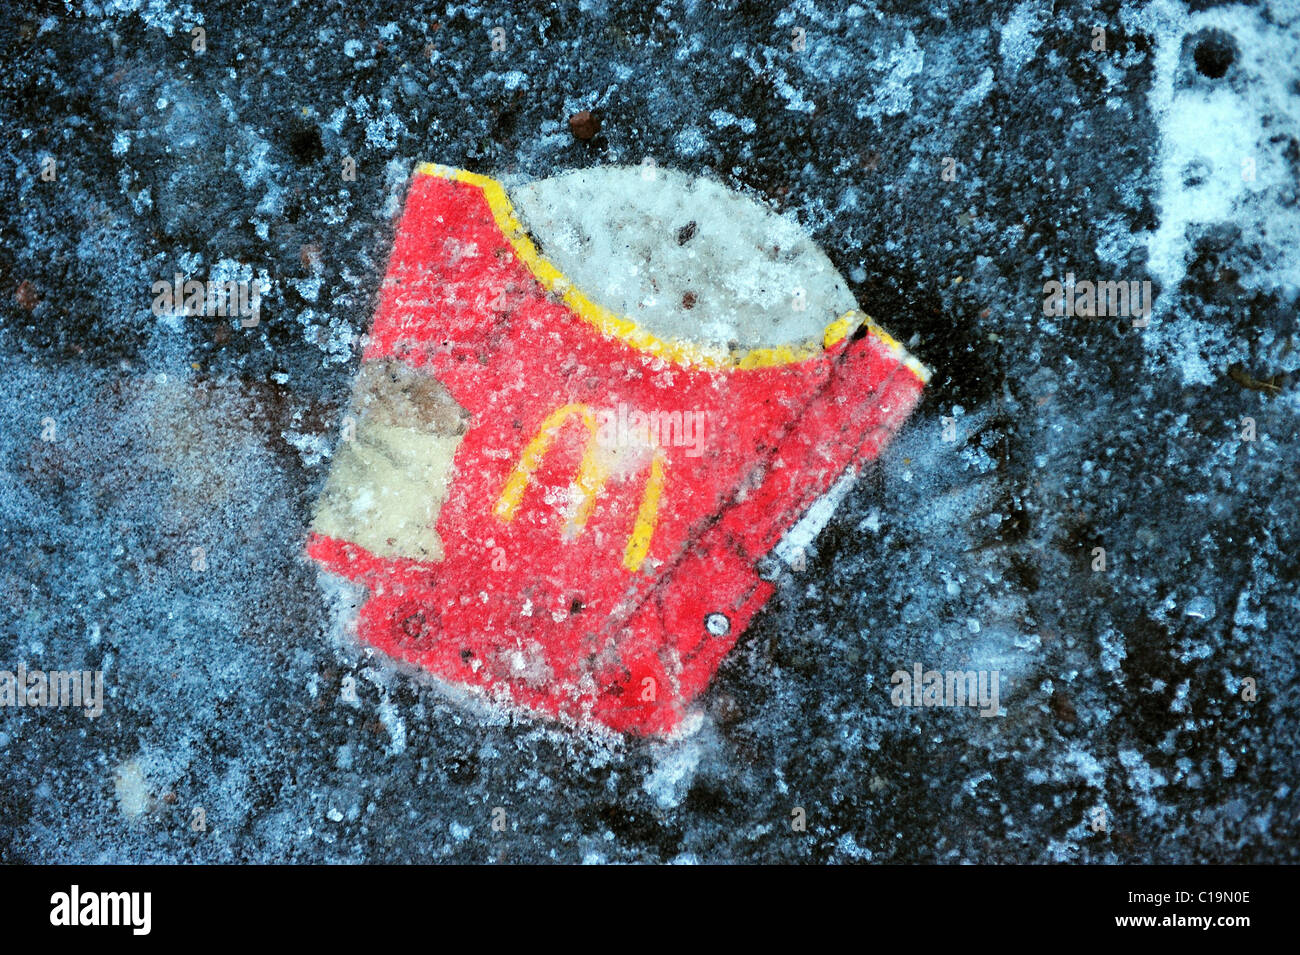 A McDonalds carton lies frozen to the ground in Glasgow during the coldest winter to hit Scotland for decades. Stock Photo